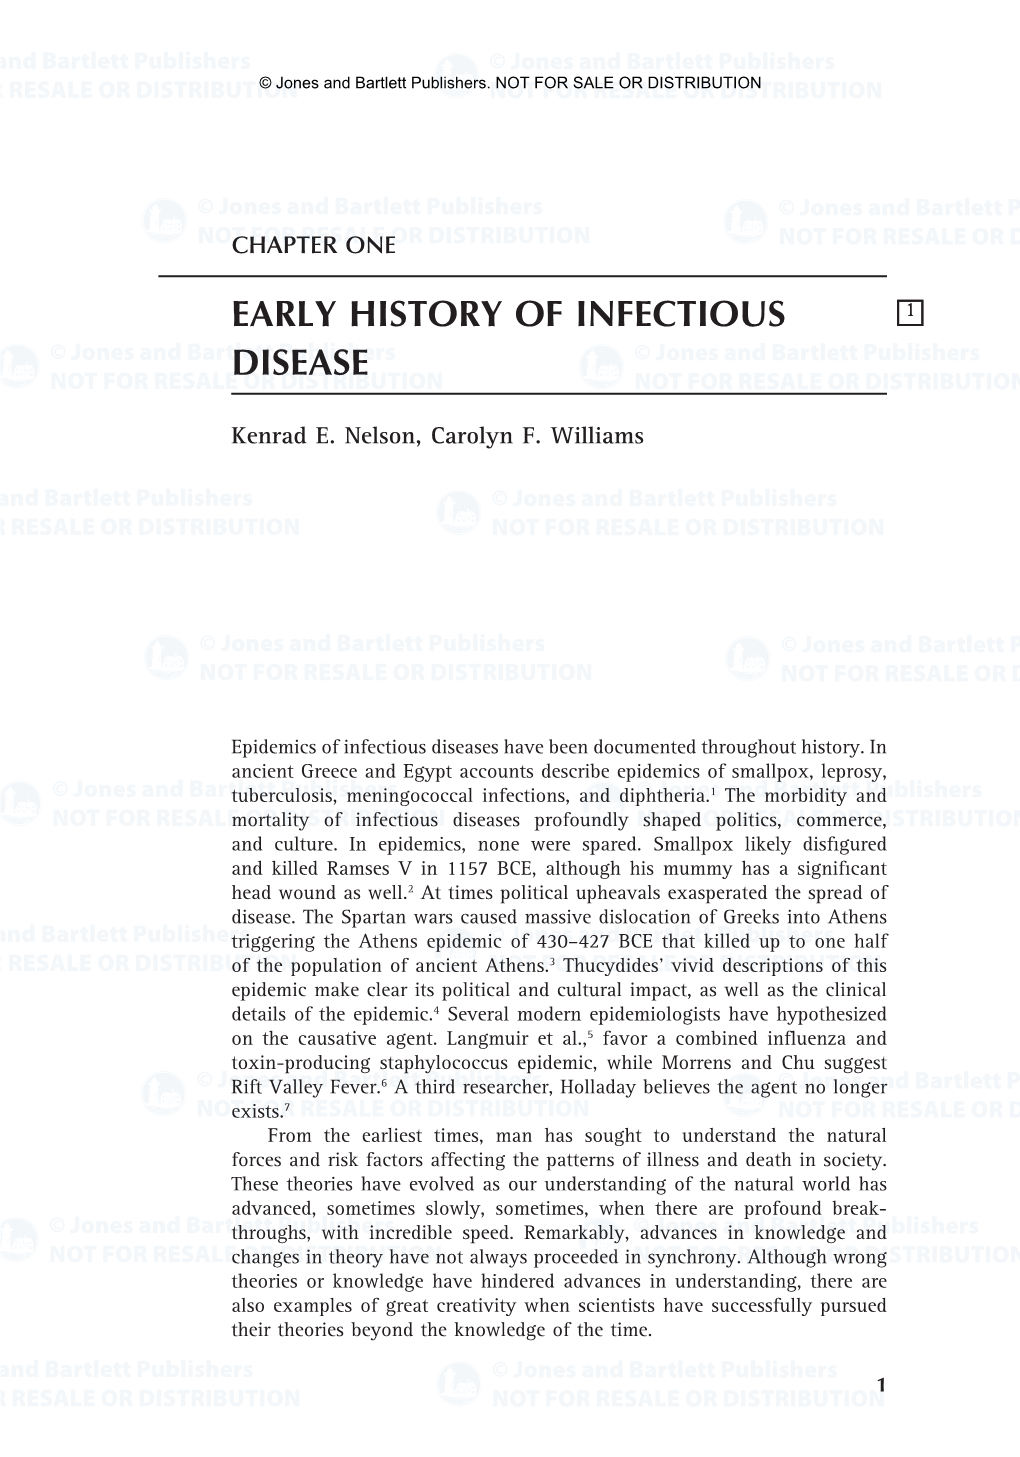 Early History of Infectious Disease 